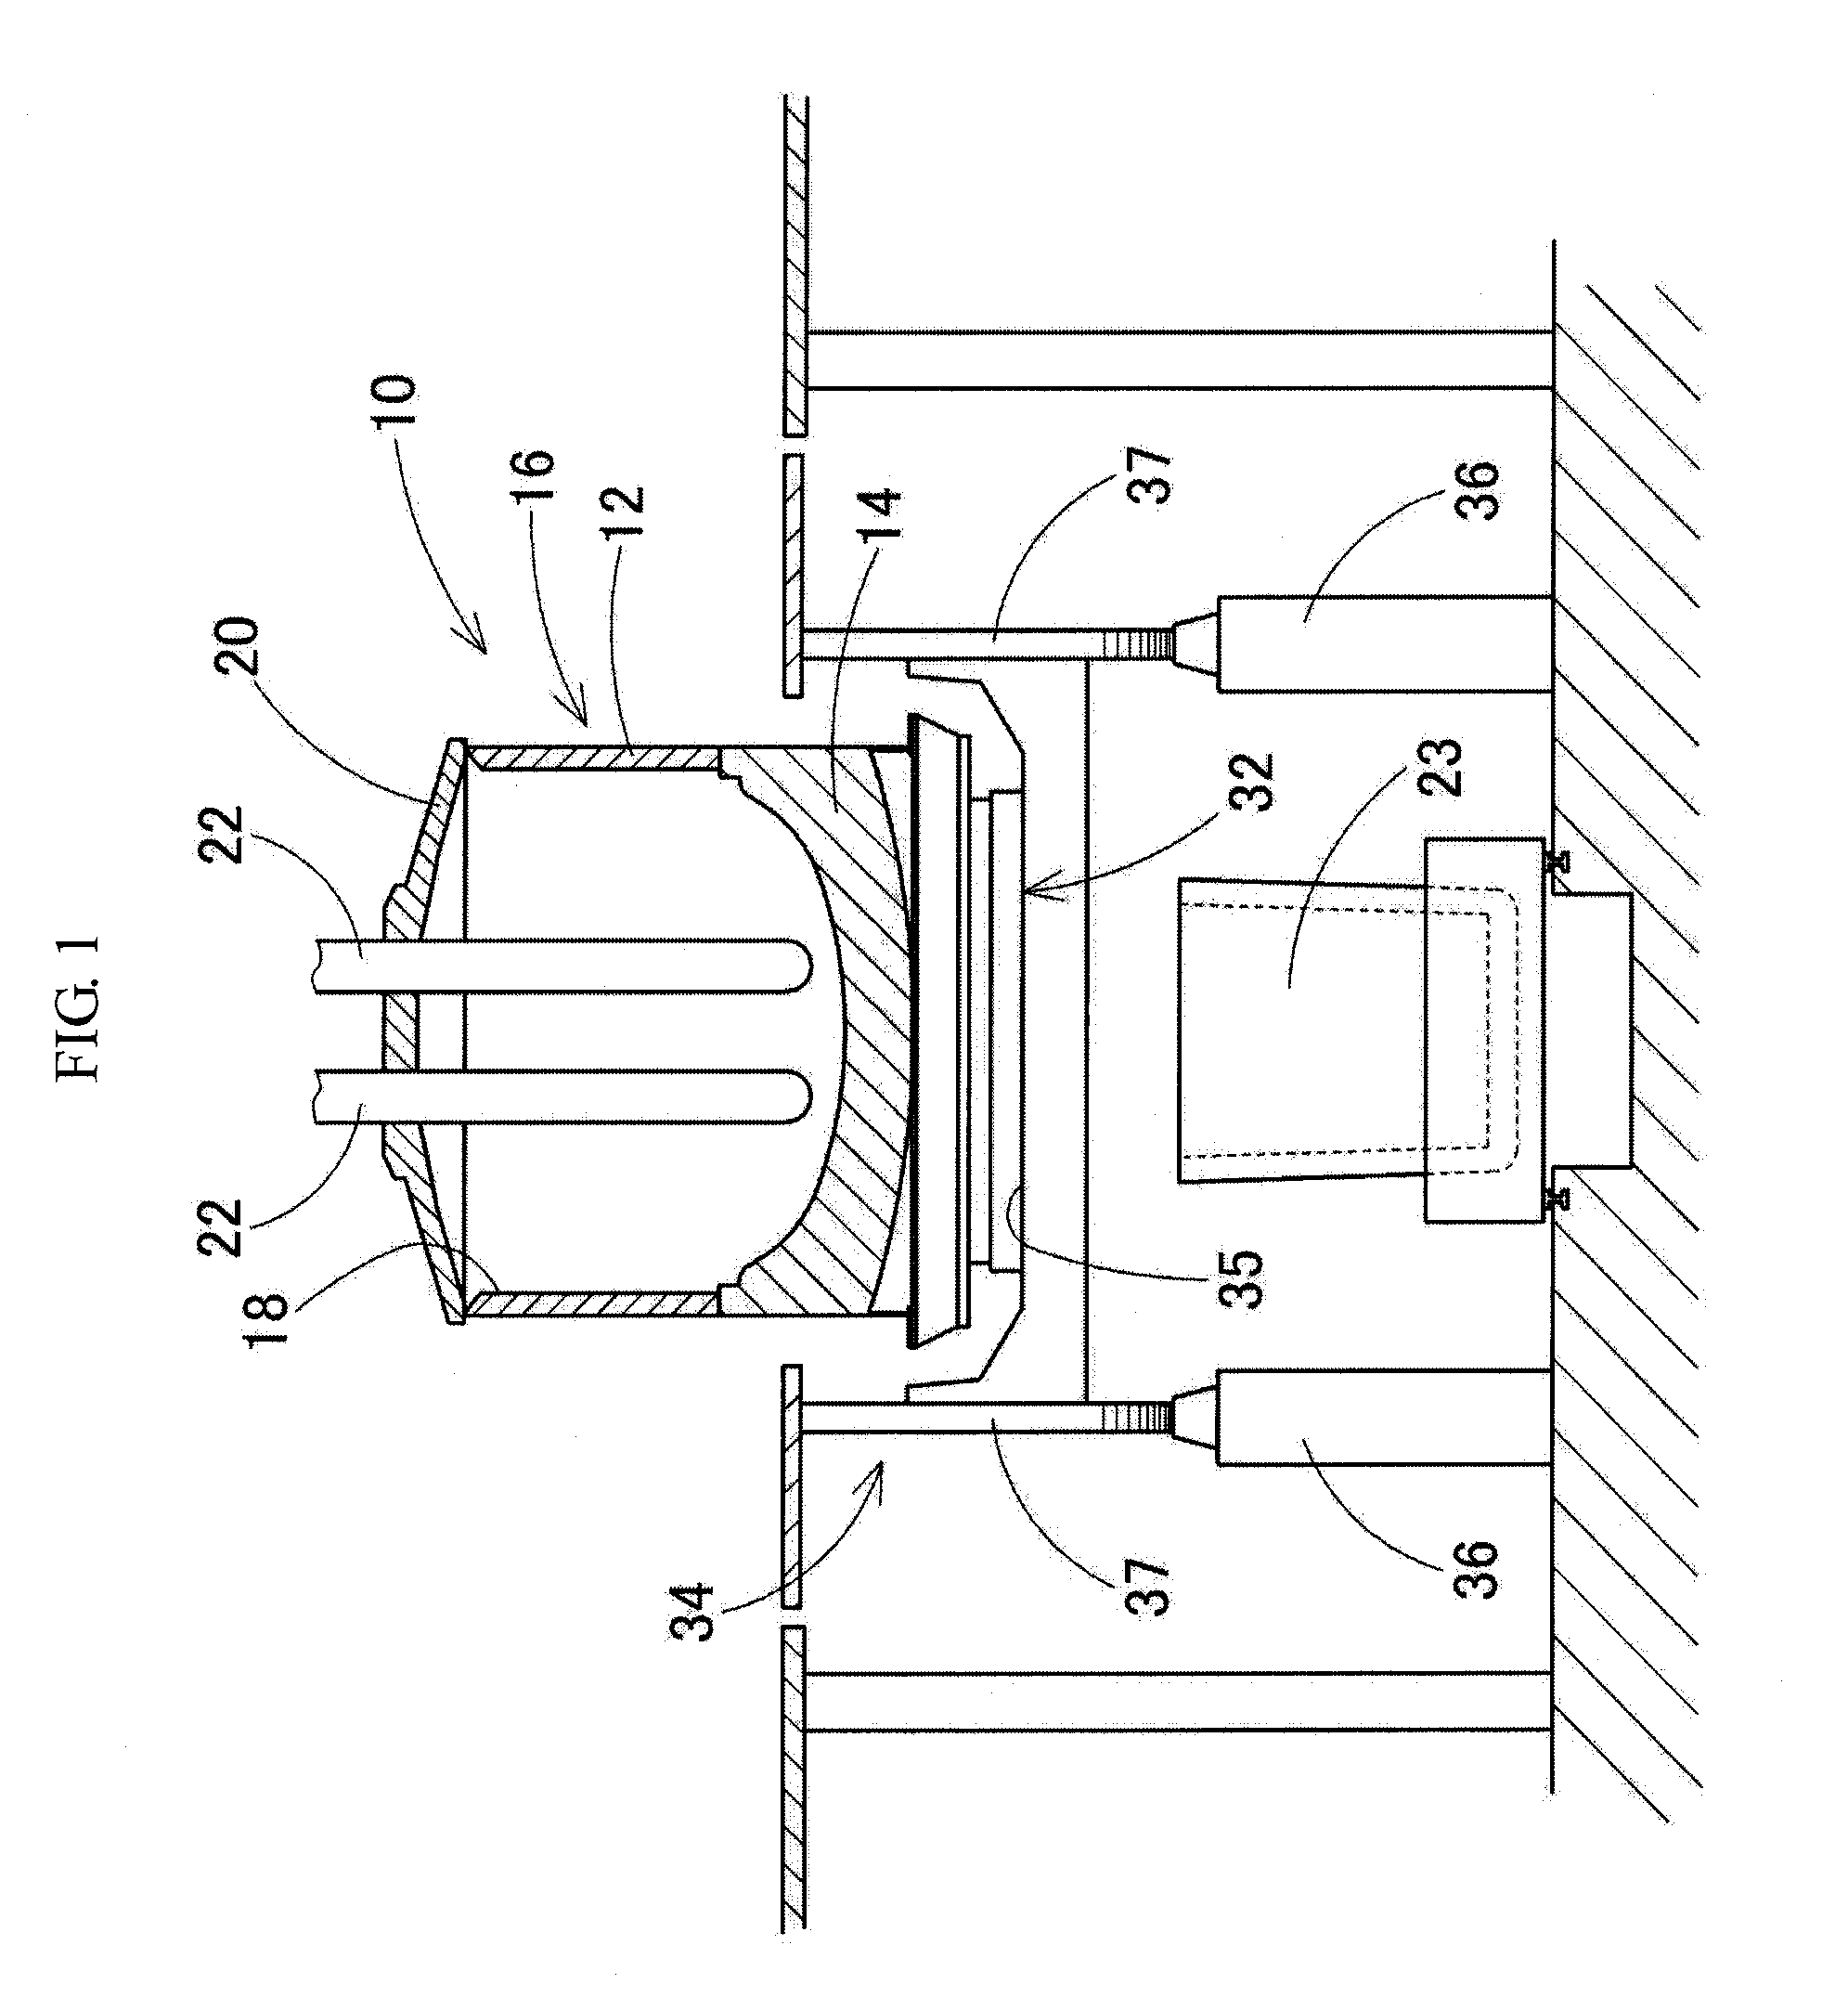 Method of operating electric arc furnace